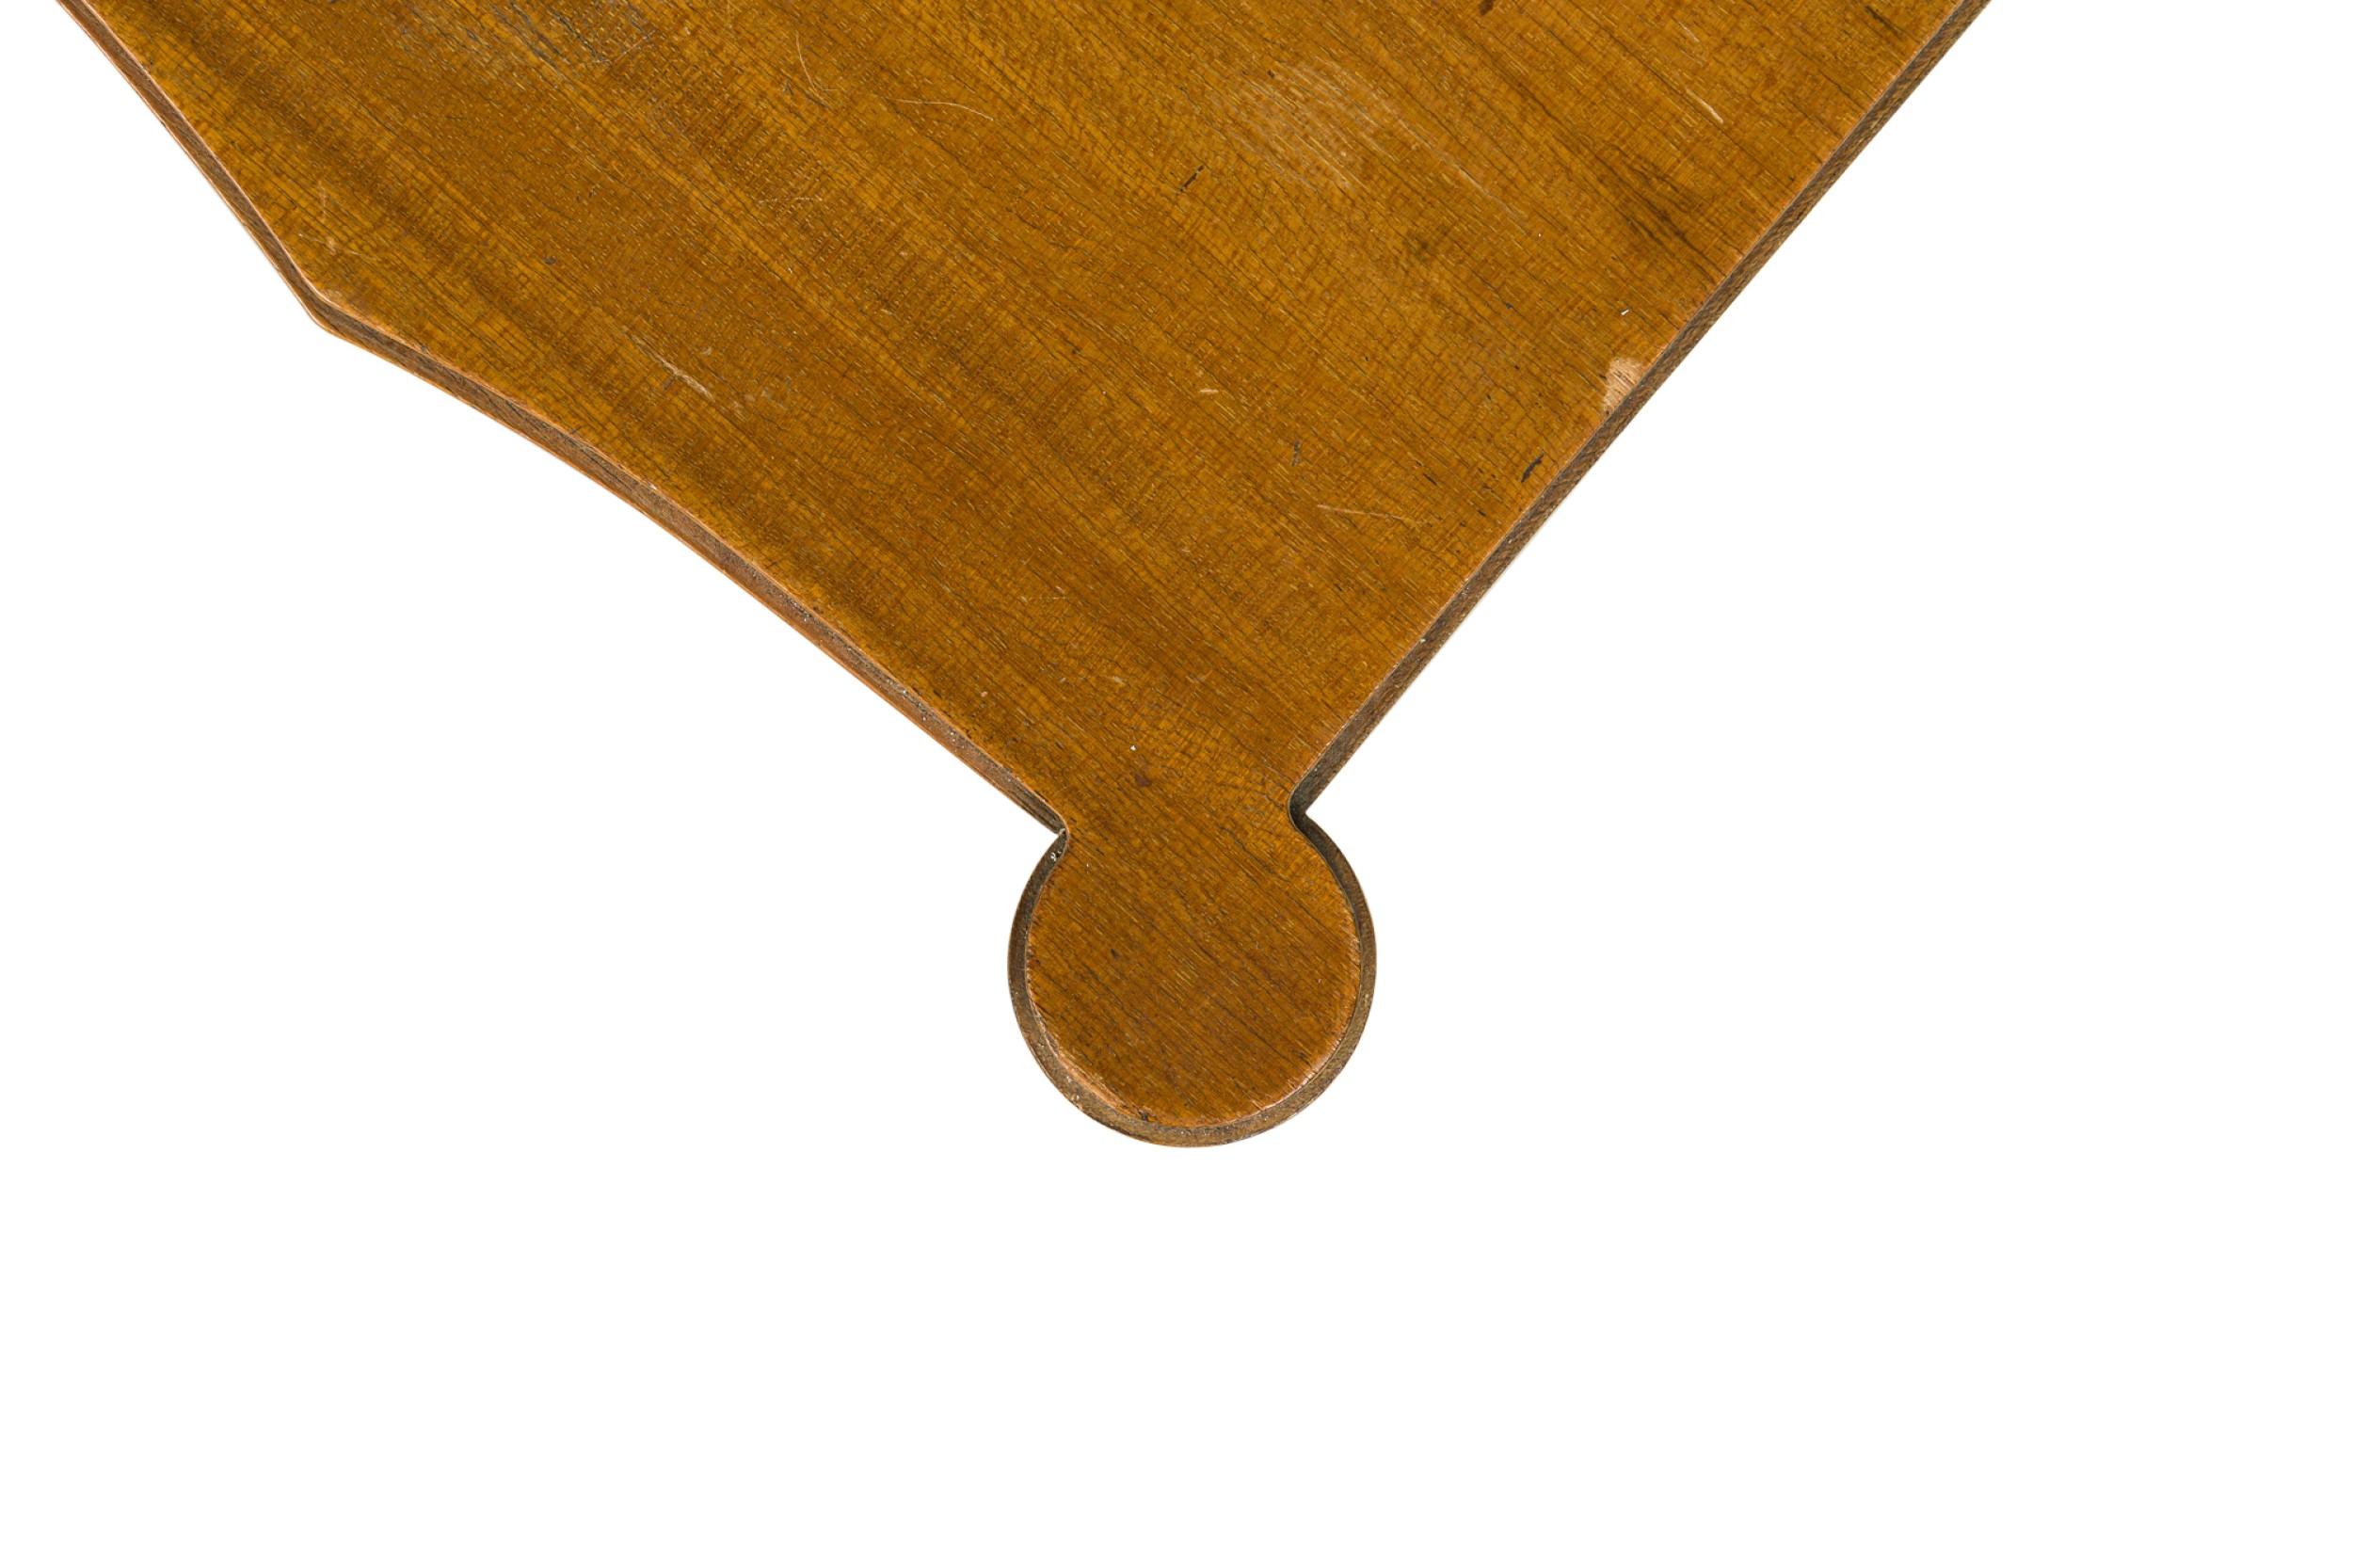 Continental Mid-Century walnut contole table having two drawers with X-shaped brass drawer pulls, resting on four tapered round legs ending in brass sabots. (PAUL FRANKL)